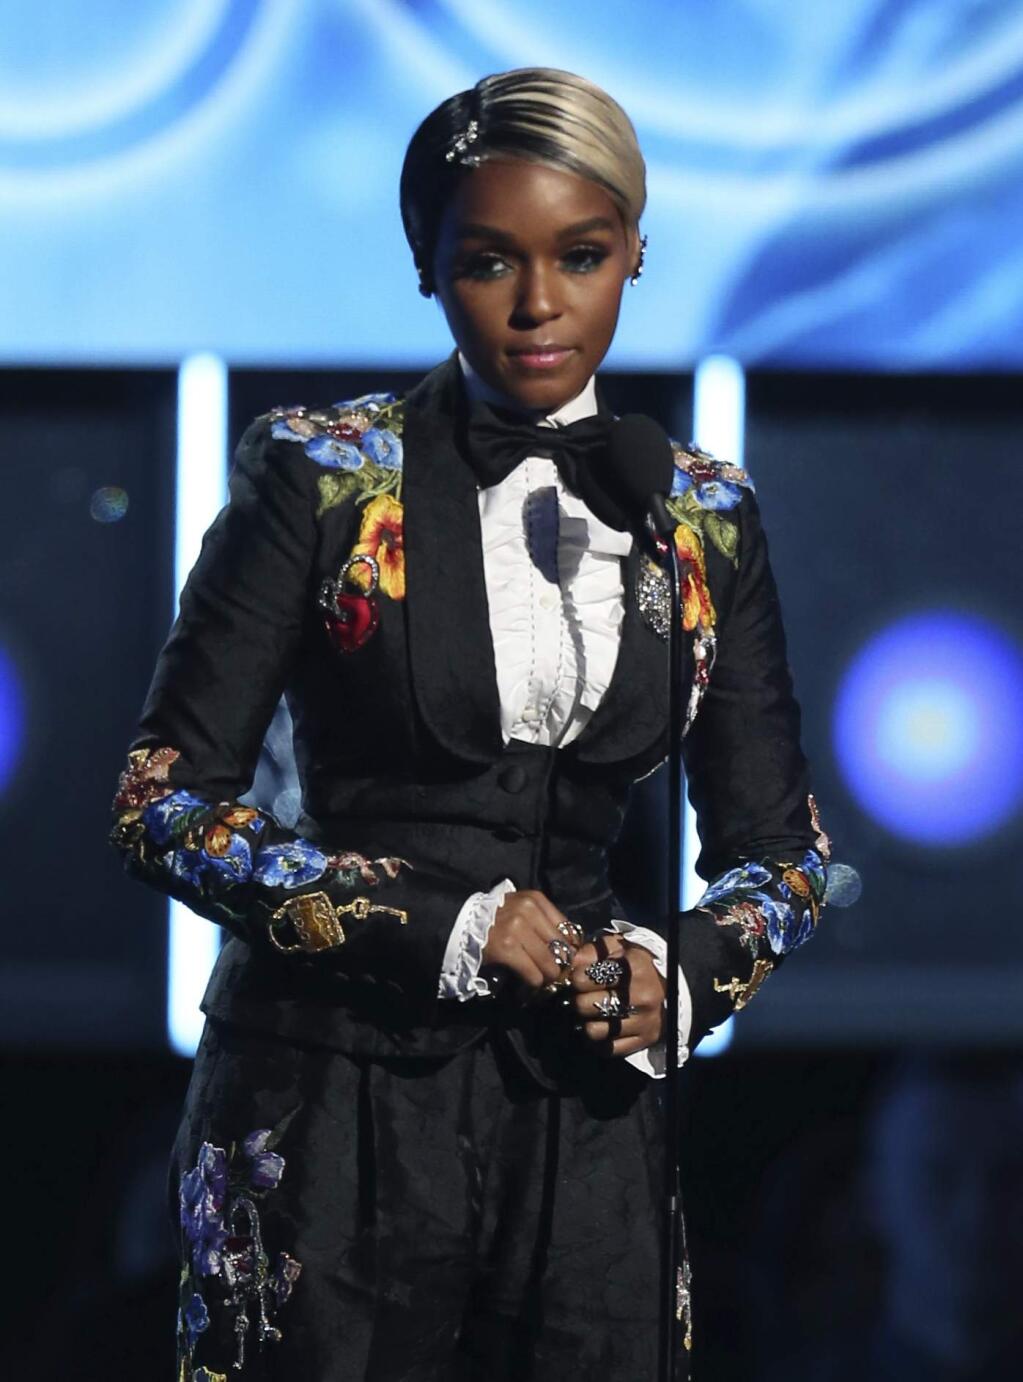 Janelle Monae introduces a performance by Kesha at the 60th annual Grammy Awards at Madison Square Garden on Sunday, Jan. 28, 2018, in New York. (Photo by Matt Sayles/Invision/AP)